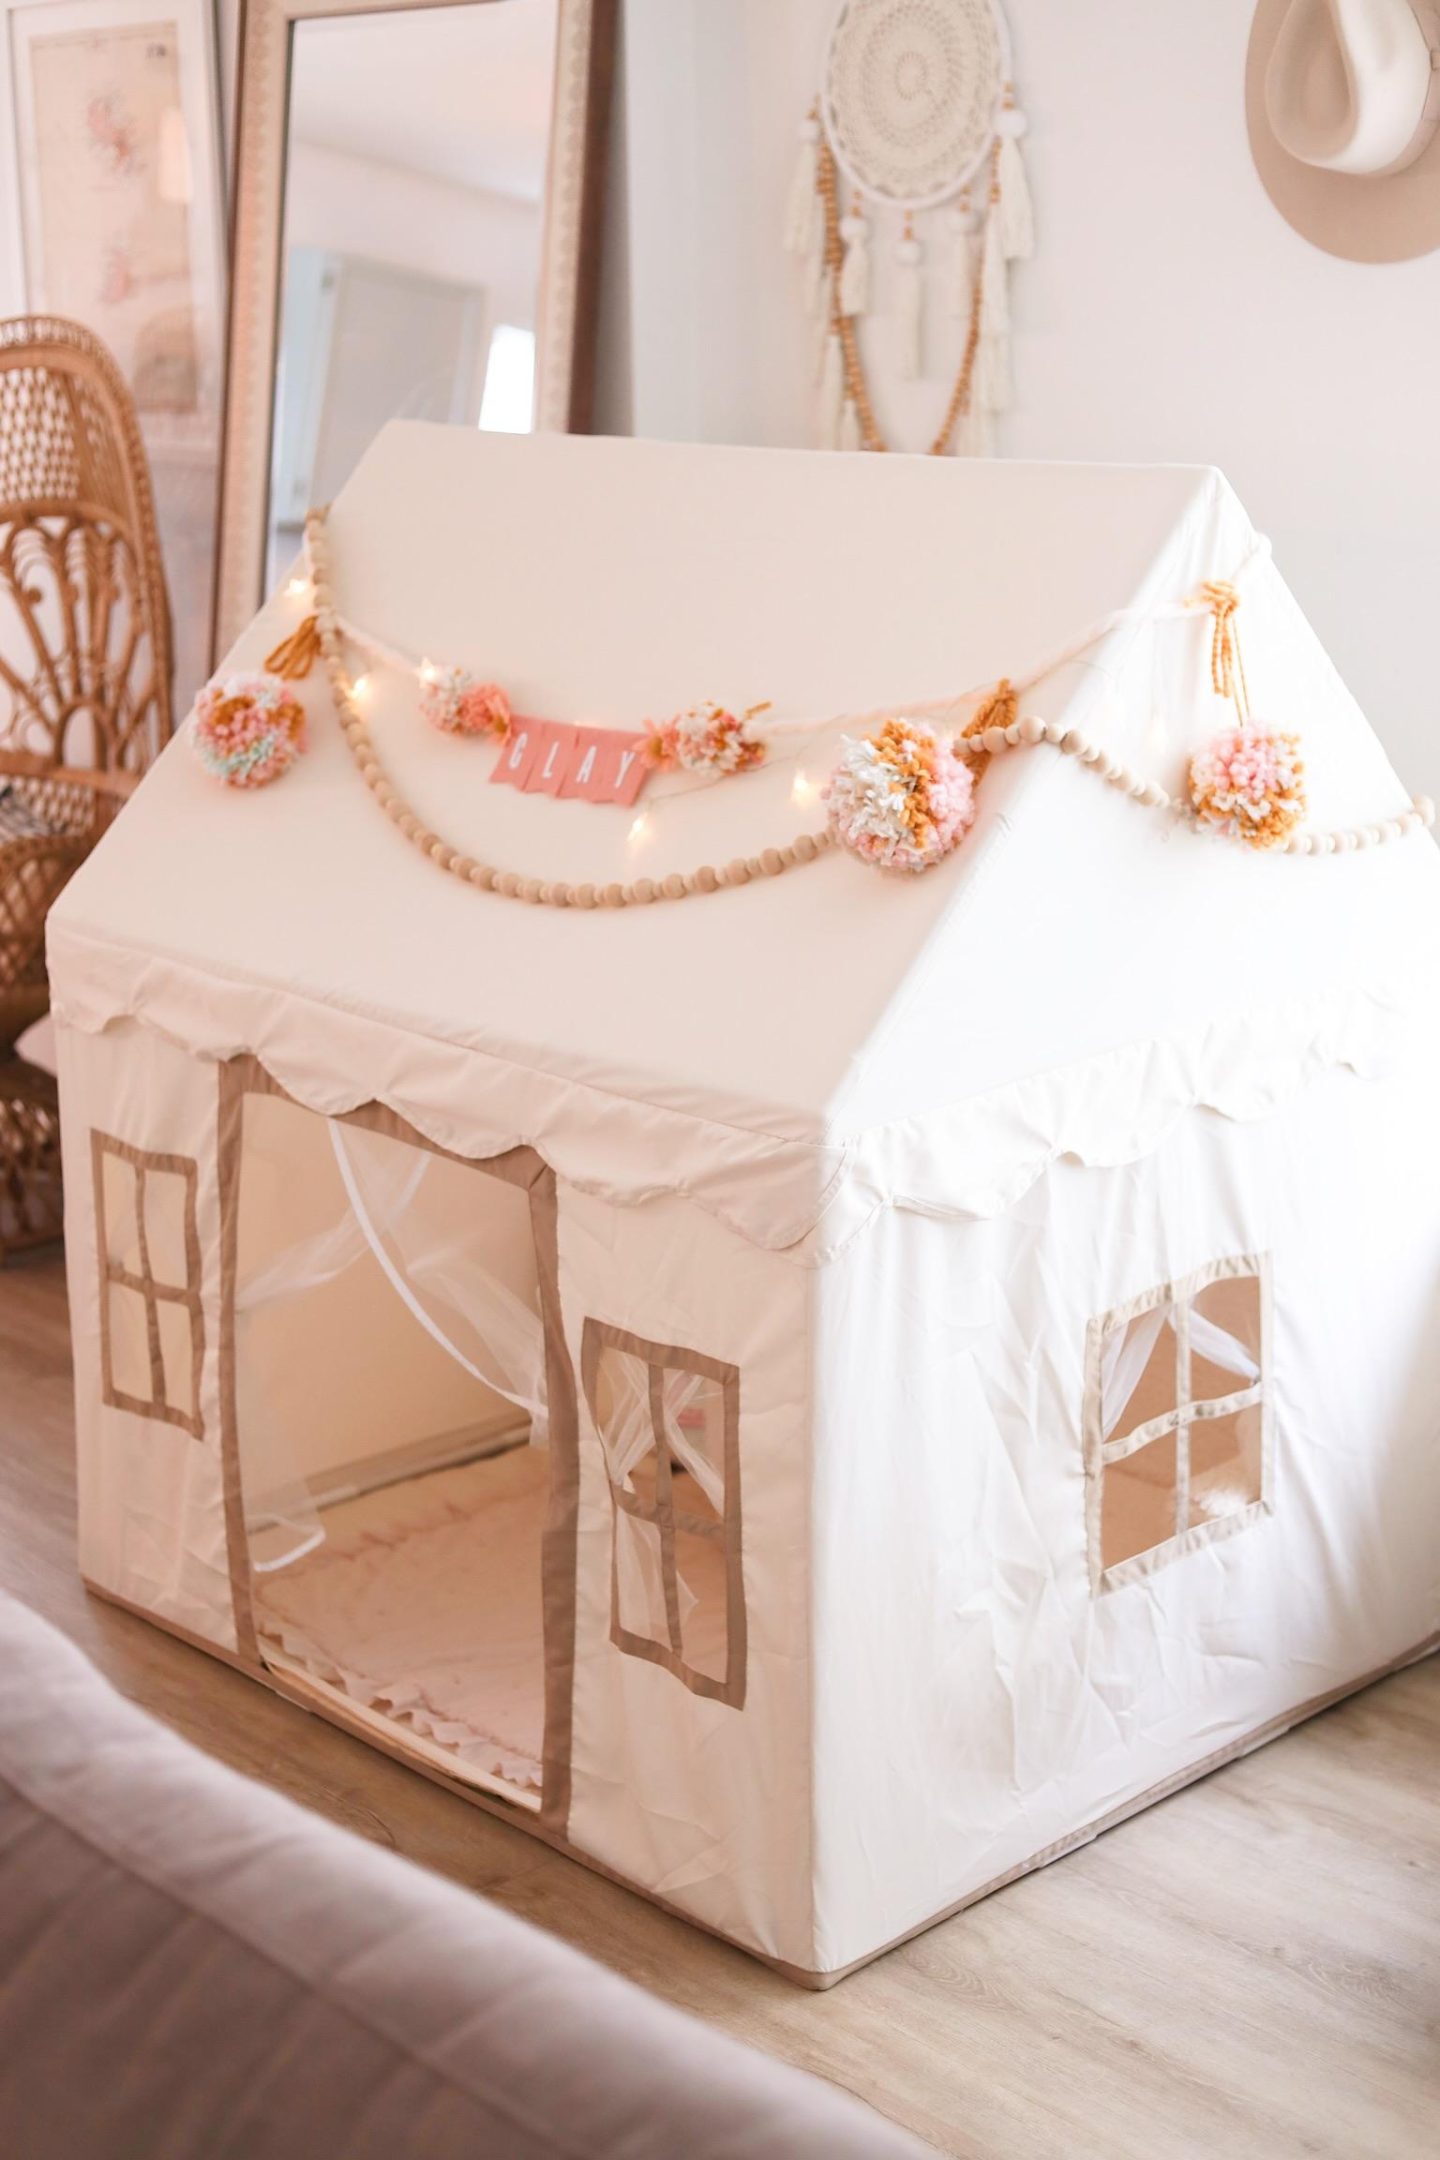 Clay's Playhouse (Amazon Little Dove Play Tent Review)